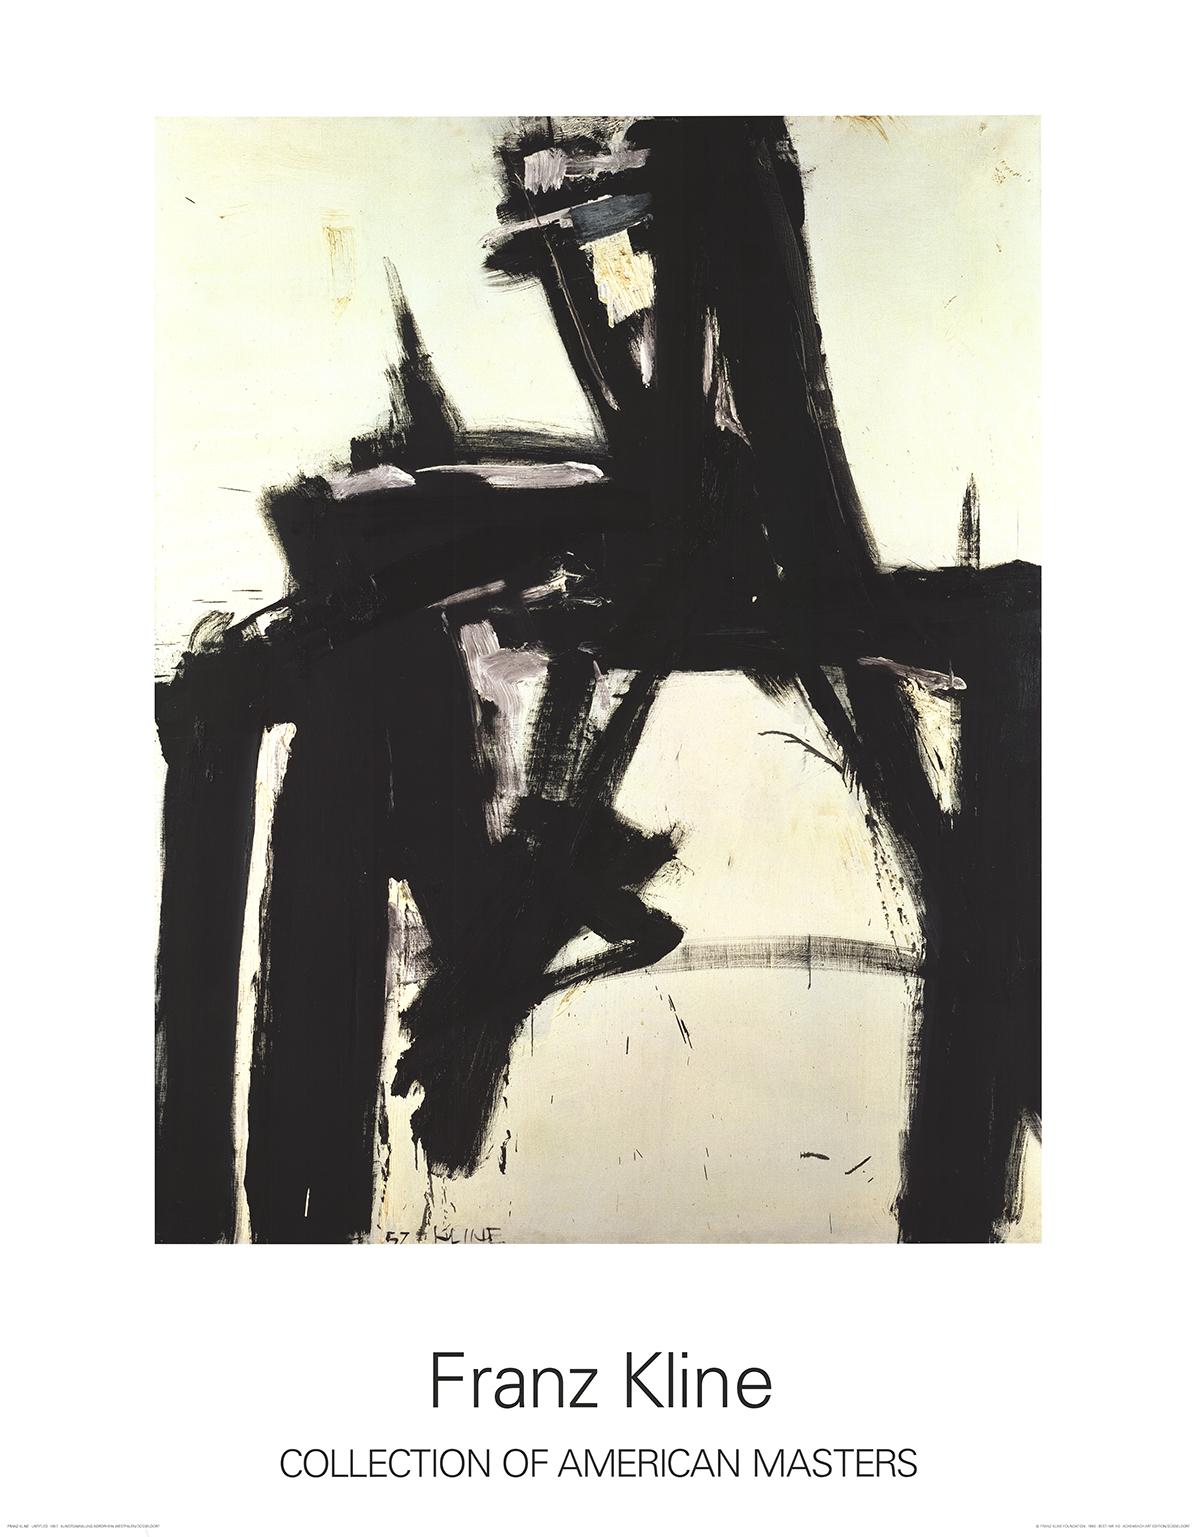 Sku: NR110
Artist: Franz Kline
Title: Untitled
Year: 1990
Signed: No
Medium: Offset Lithograph
Paper Size: 49 x 37.5 inches ( 124.46 x 95.25 cm )
Image Size: 35.75 x 28.25 inches ( 90.805 x 71.755 cm )
Edition Size: Unknown
Framed: No
Condition: A: